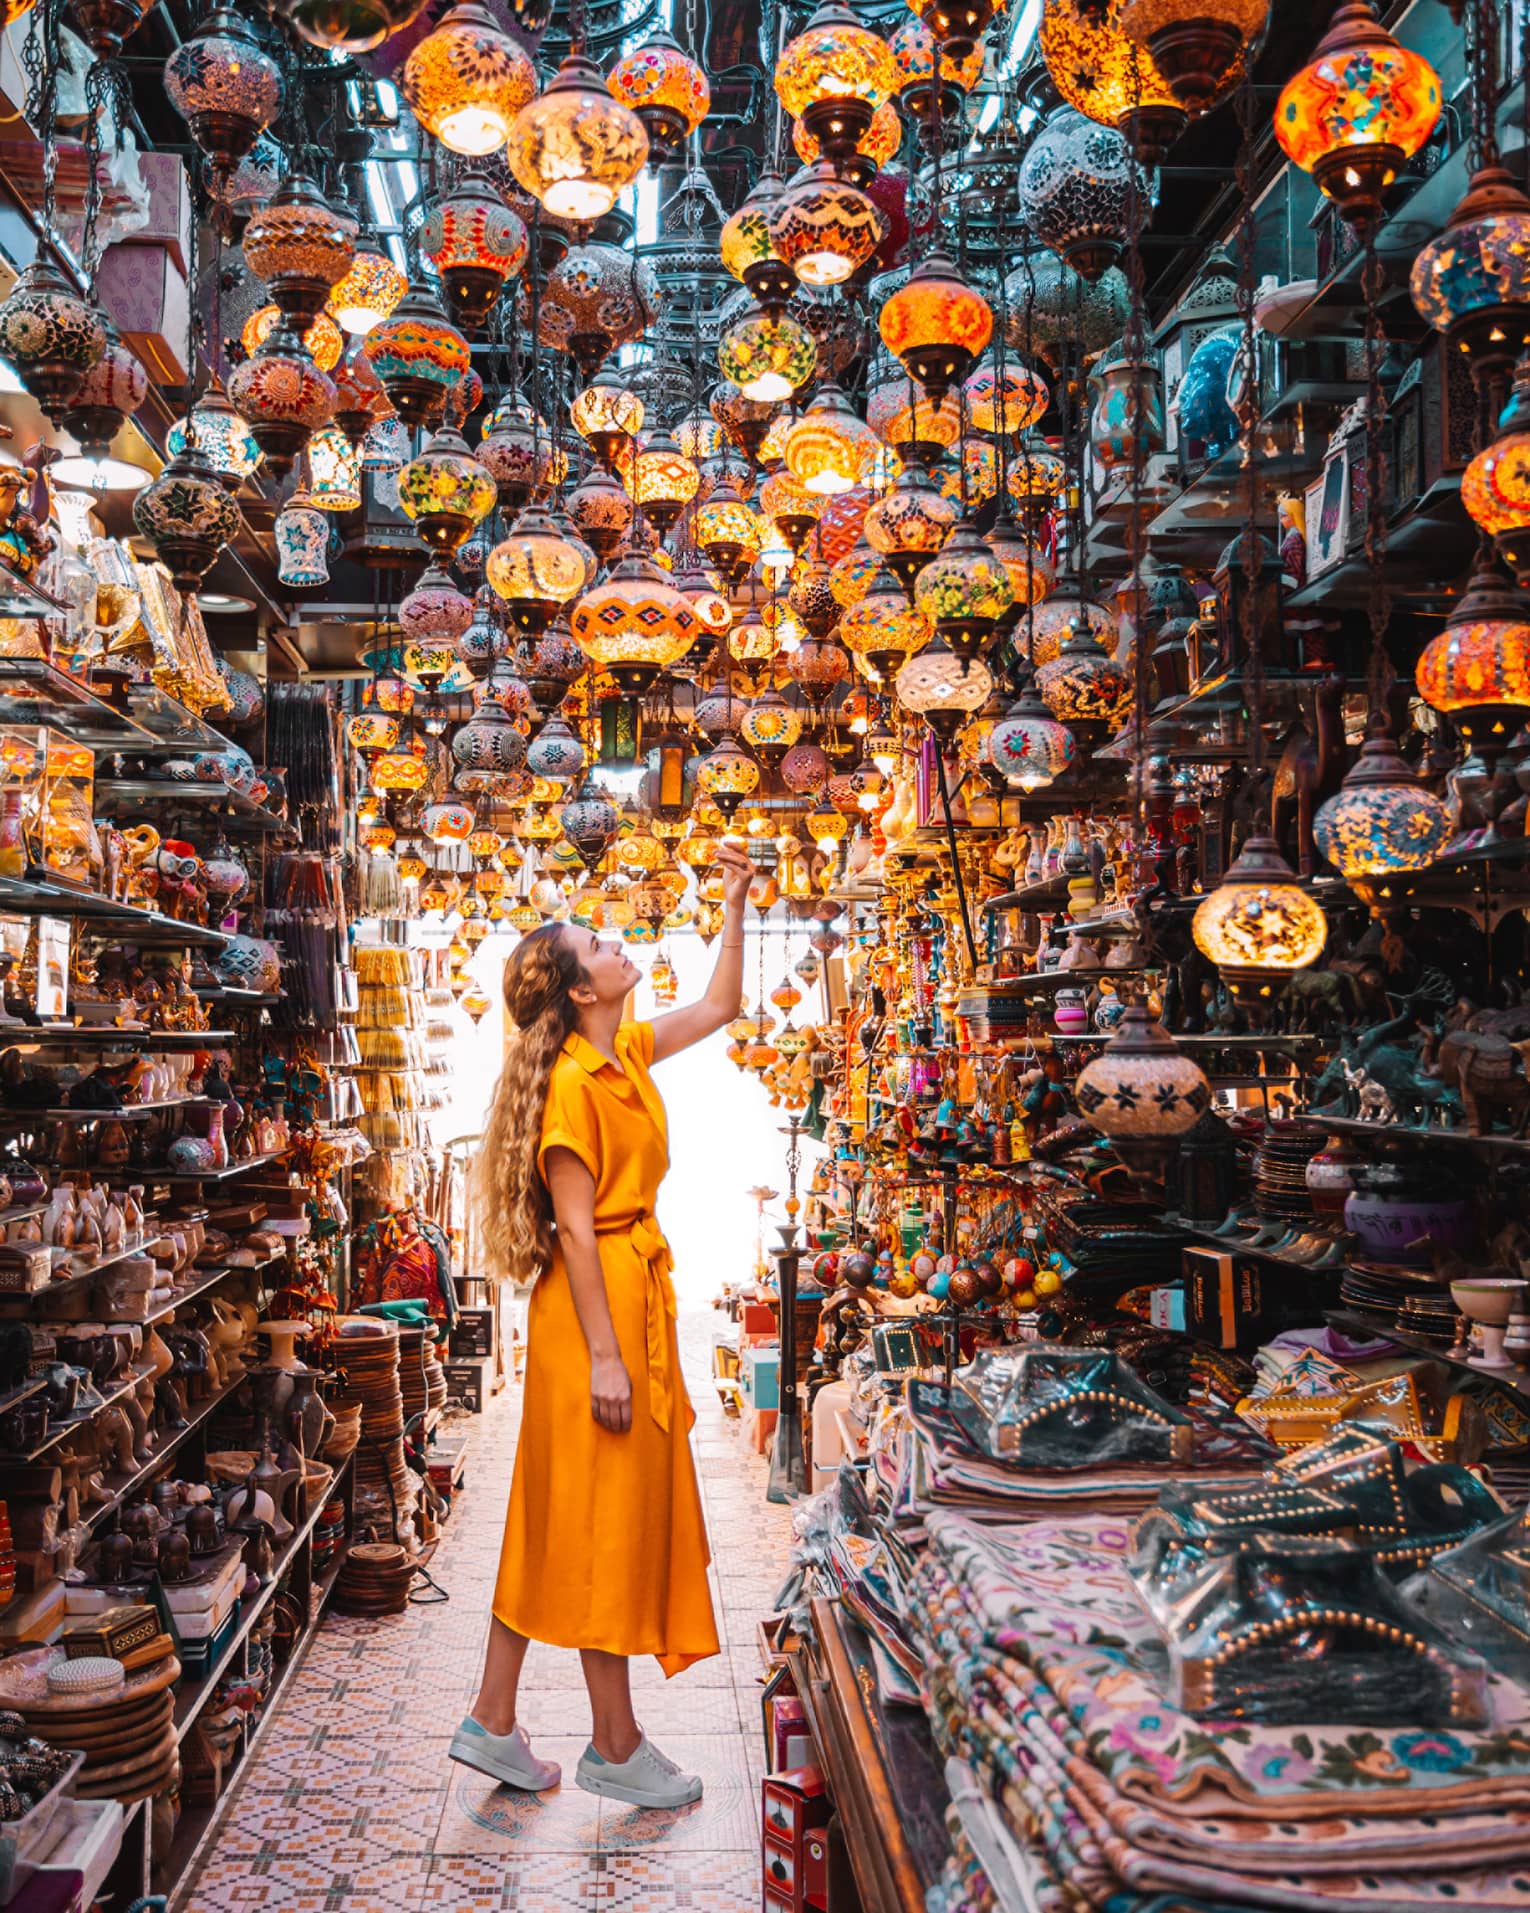 A woman in a yellow dress stands in the centre of a market under a series of bright lamps.